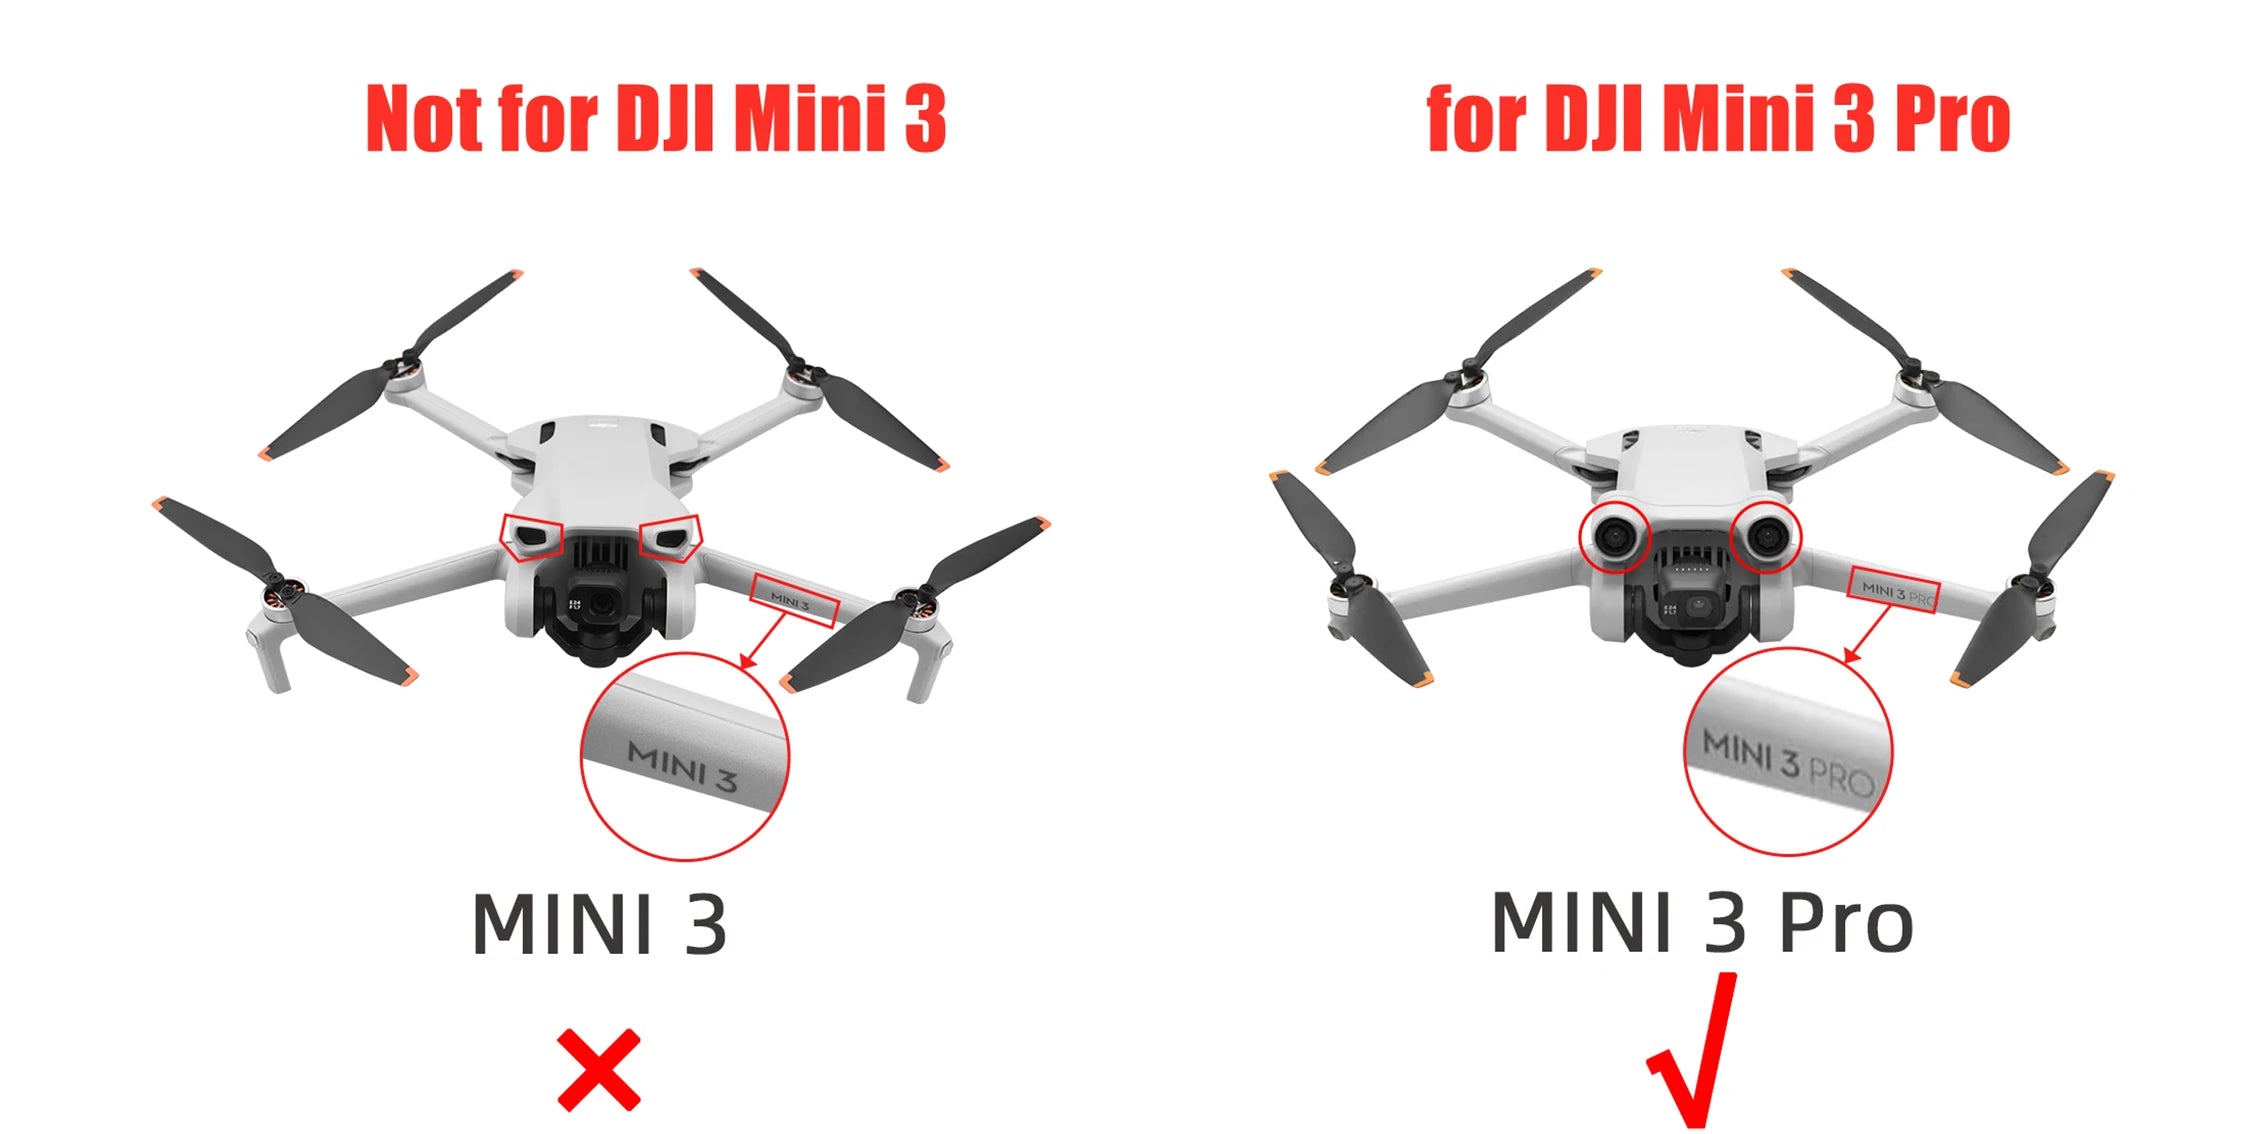 Not available for DJI MINI 3 Feature: